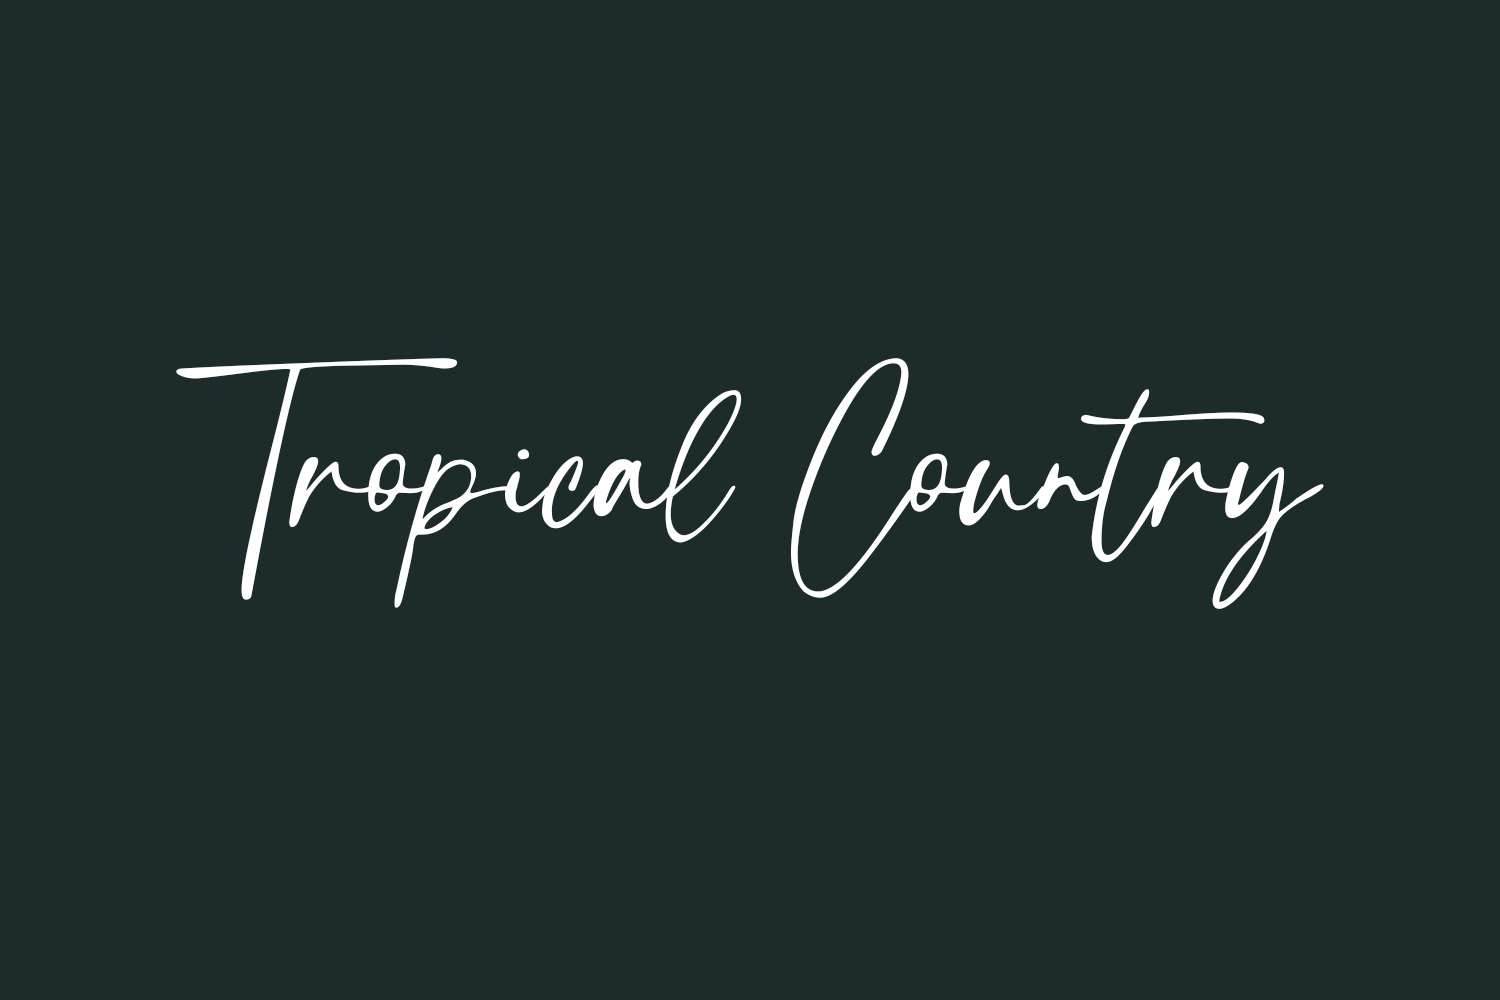 Tropical Country Free Font